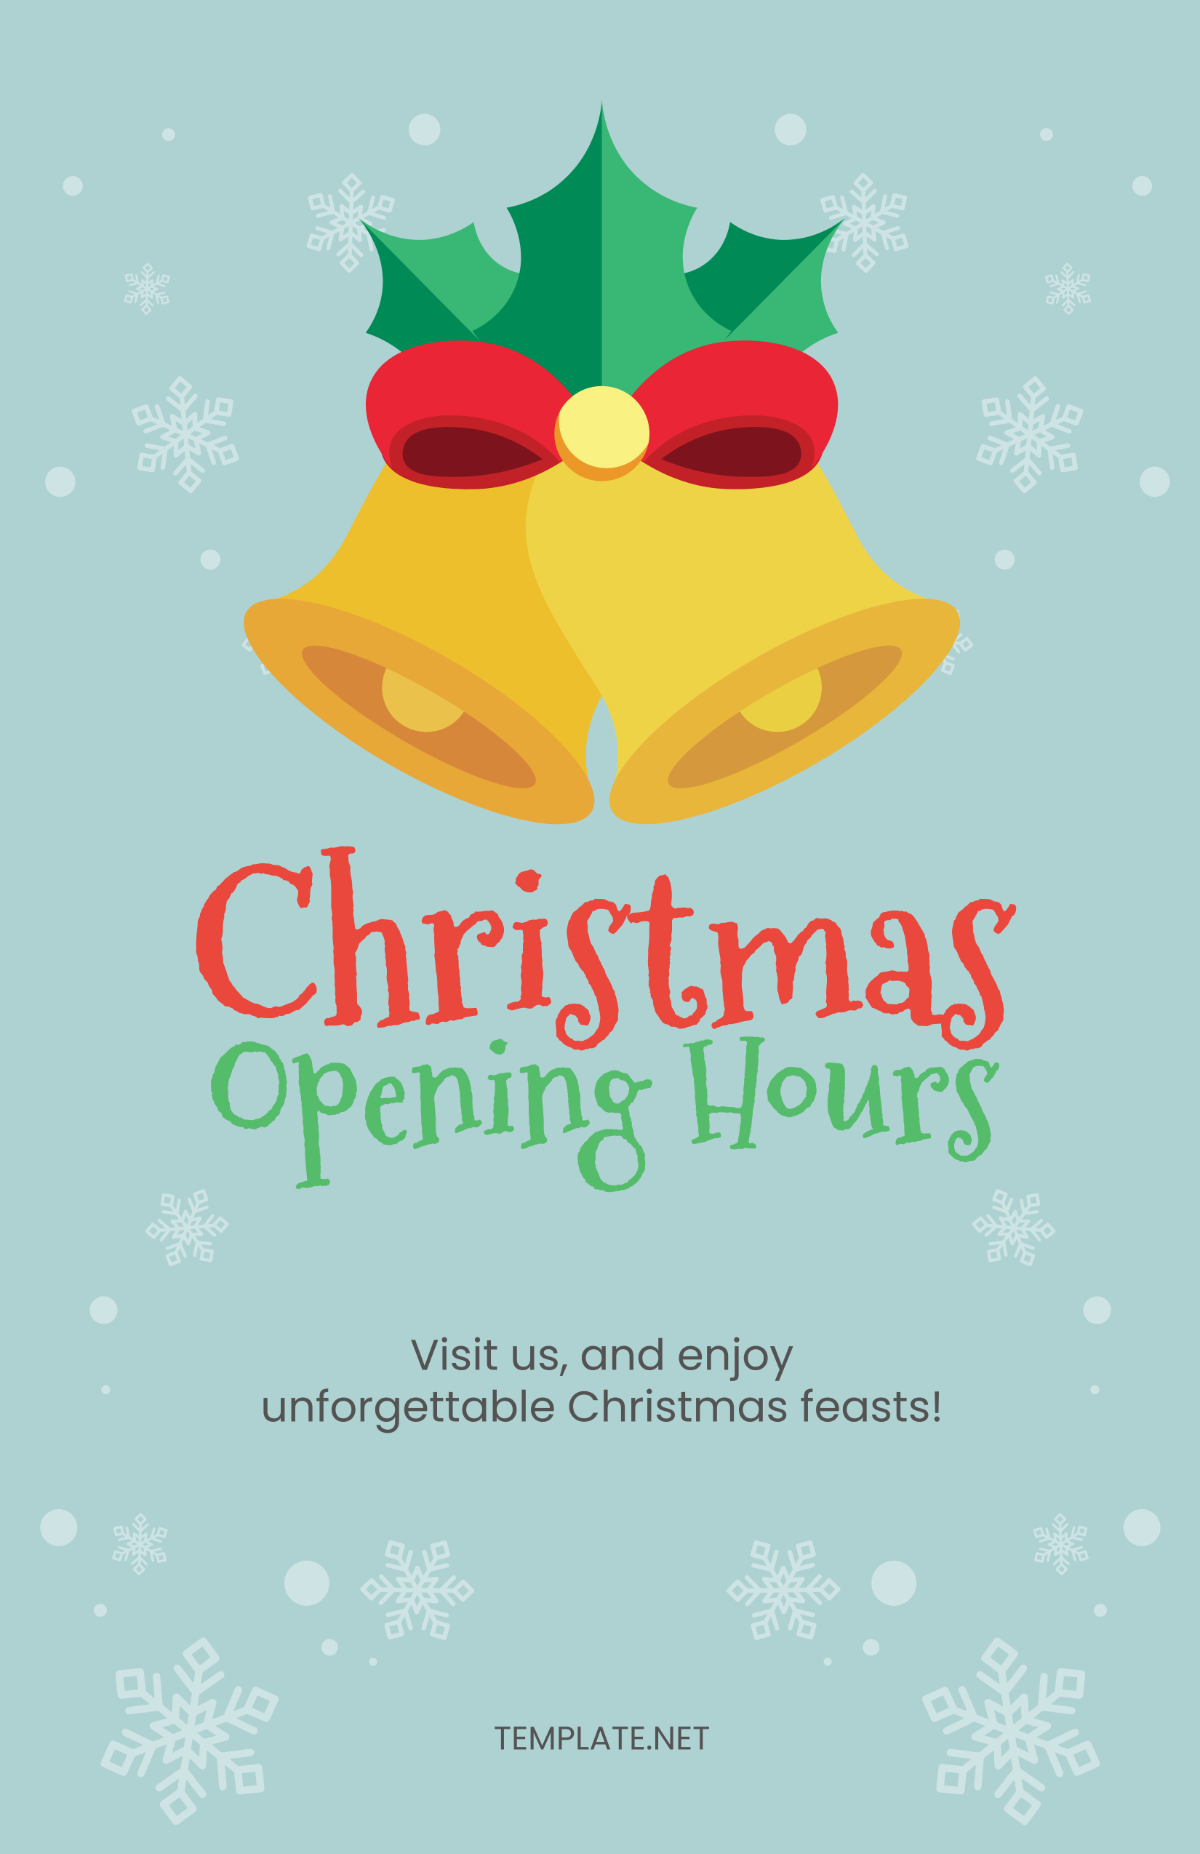 Christmas Opening Hours Poster Template